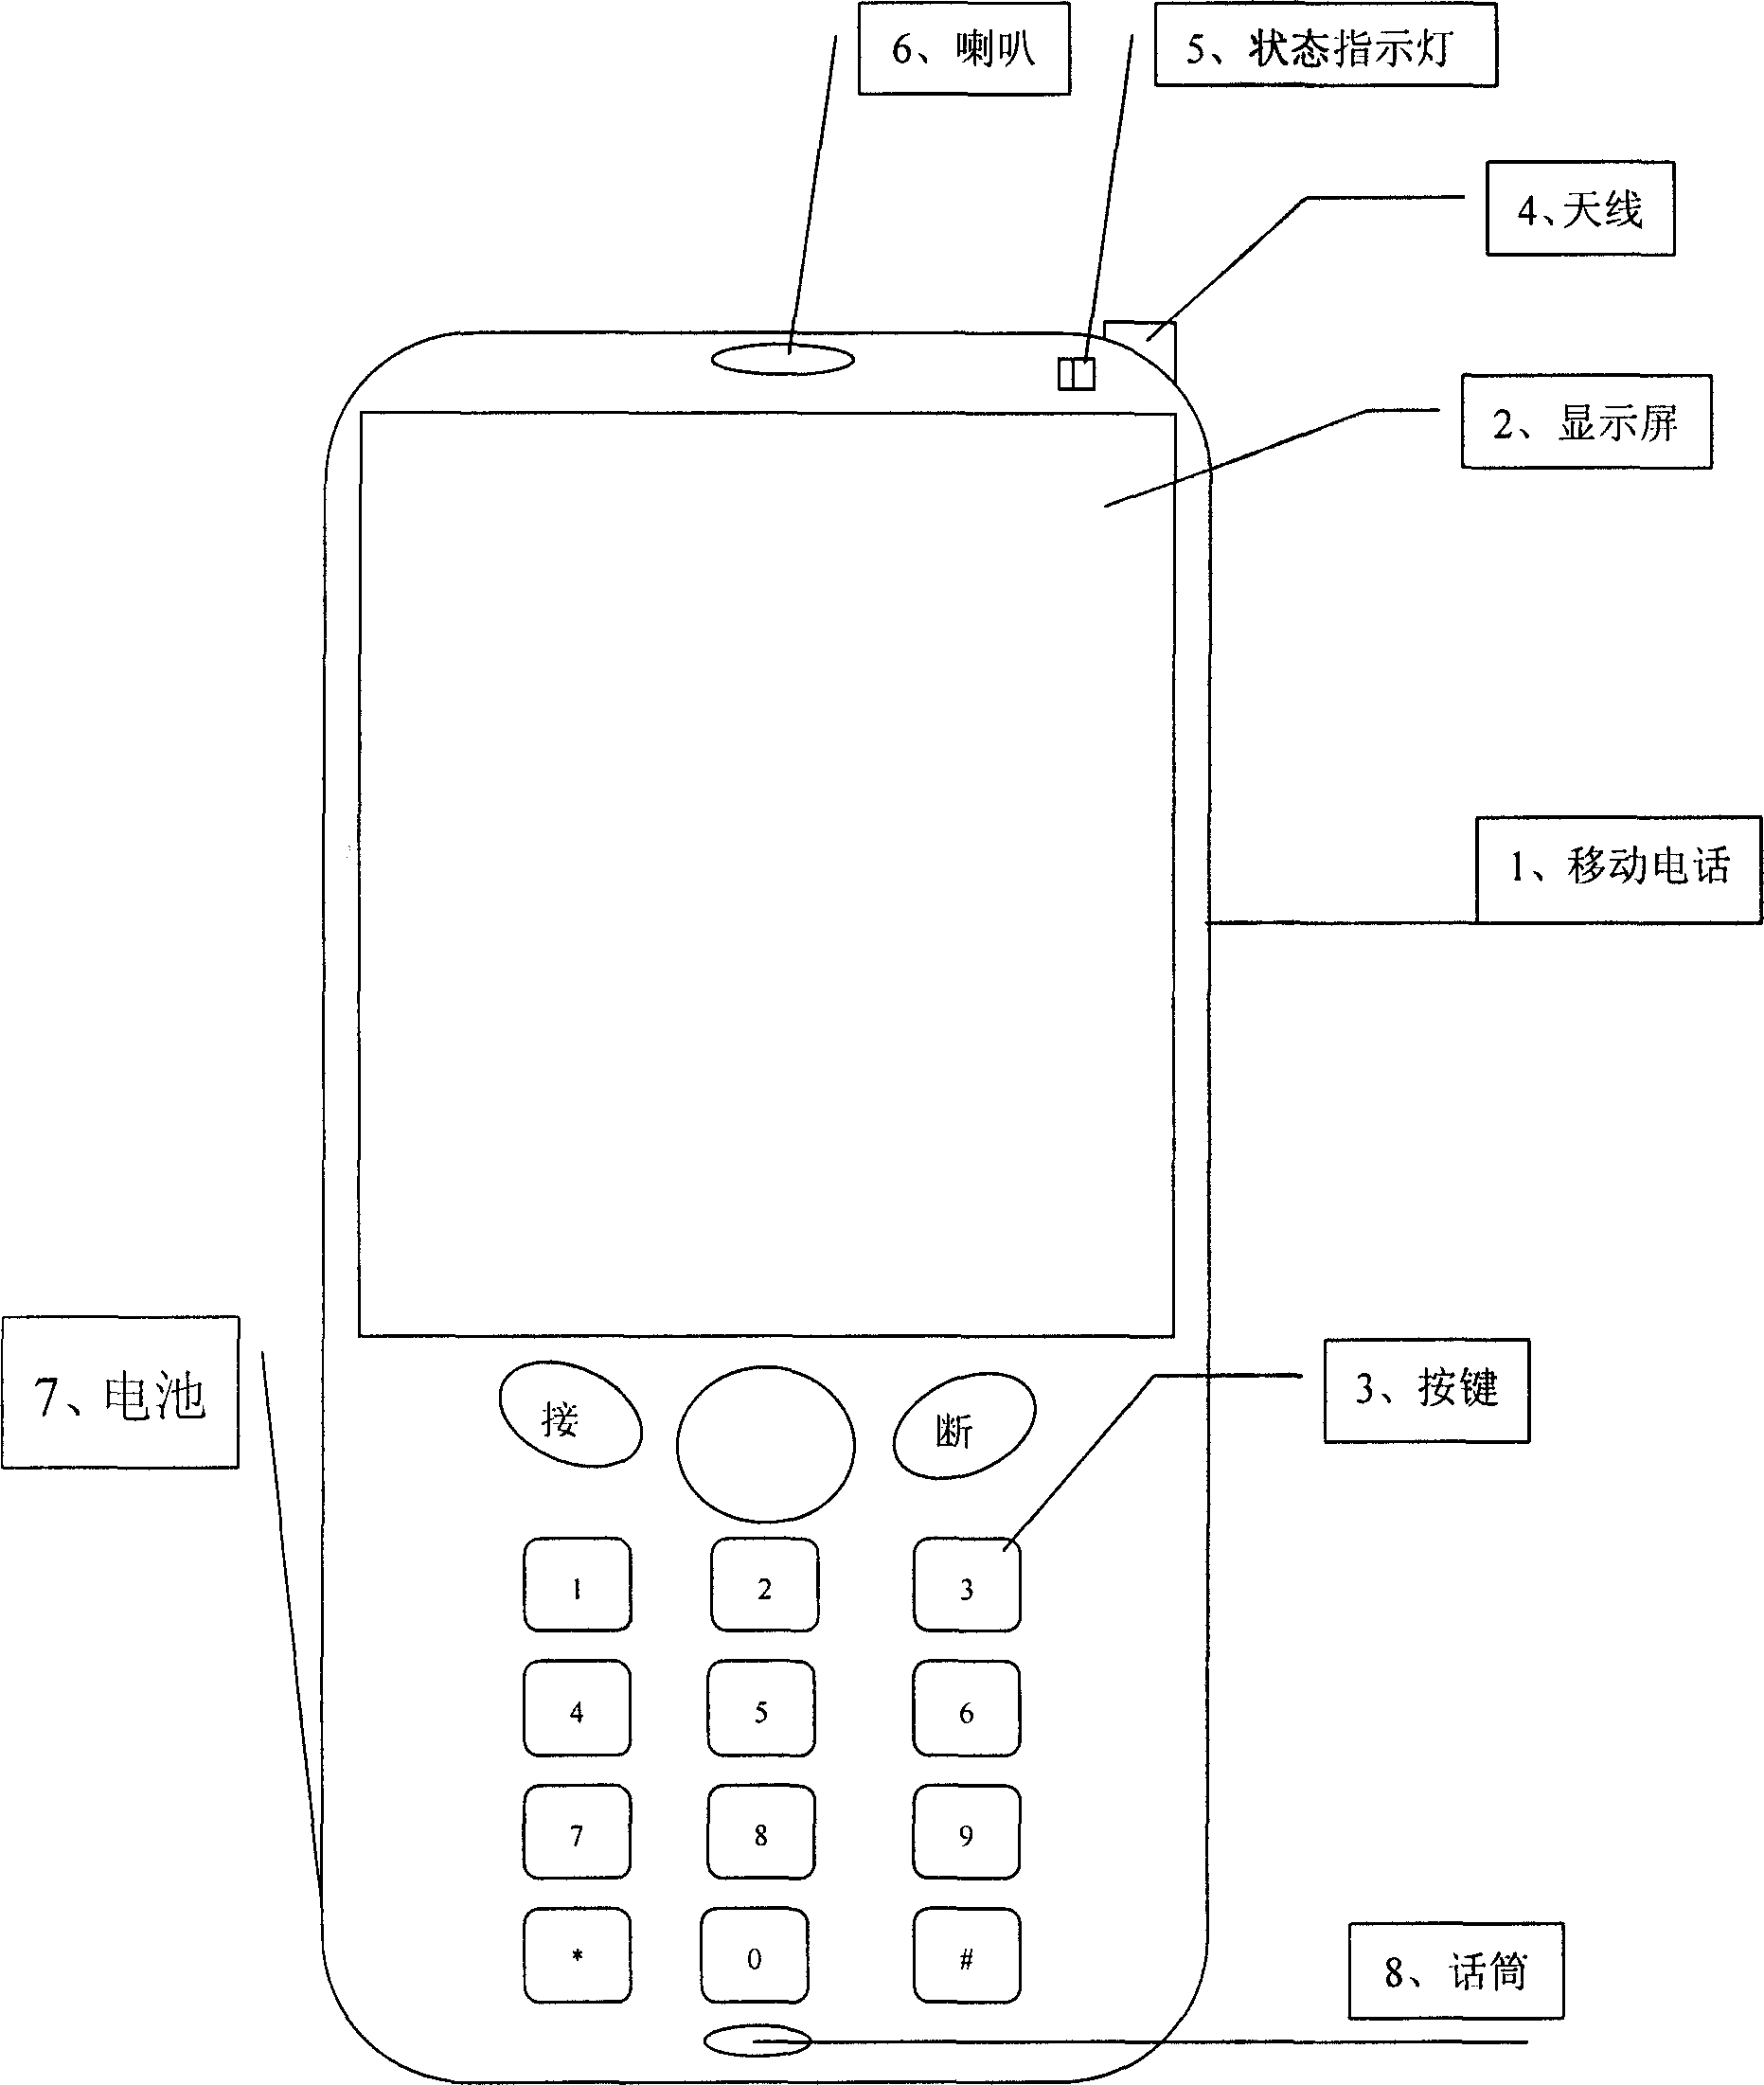 Method for making mobile telephone select tel. numbers to be transferred